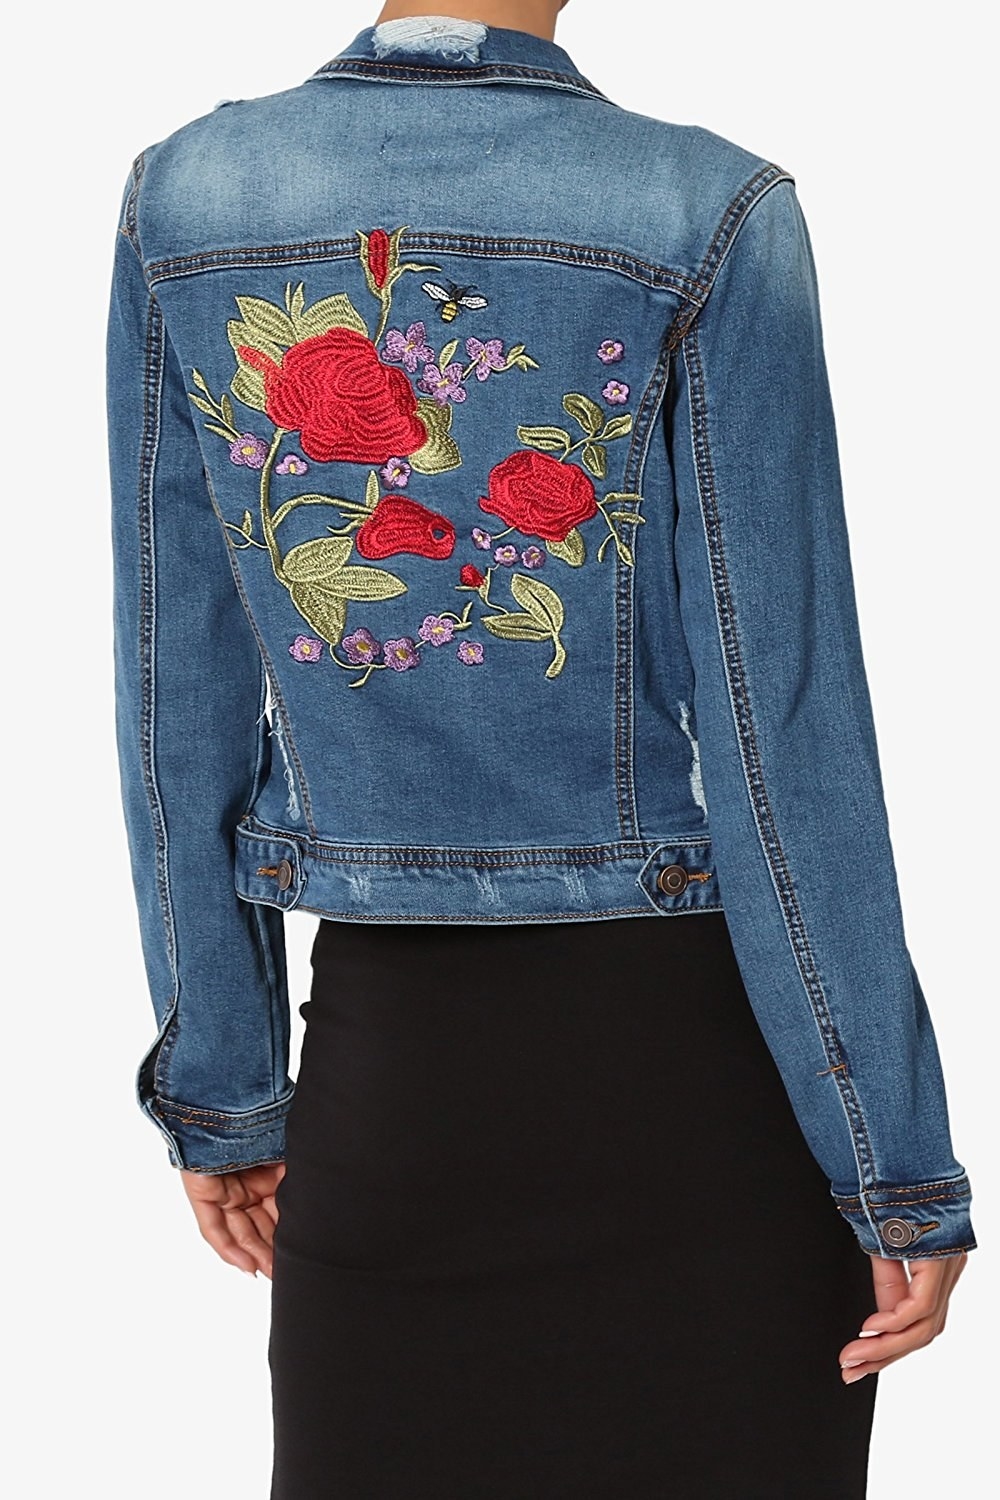 23 Trendy Statements Jackets You'll ~Fall~ In Love With